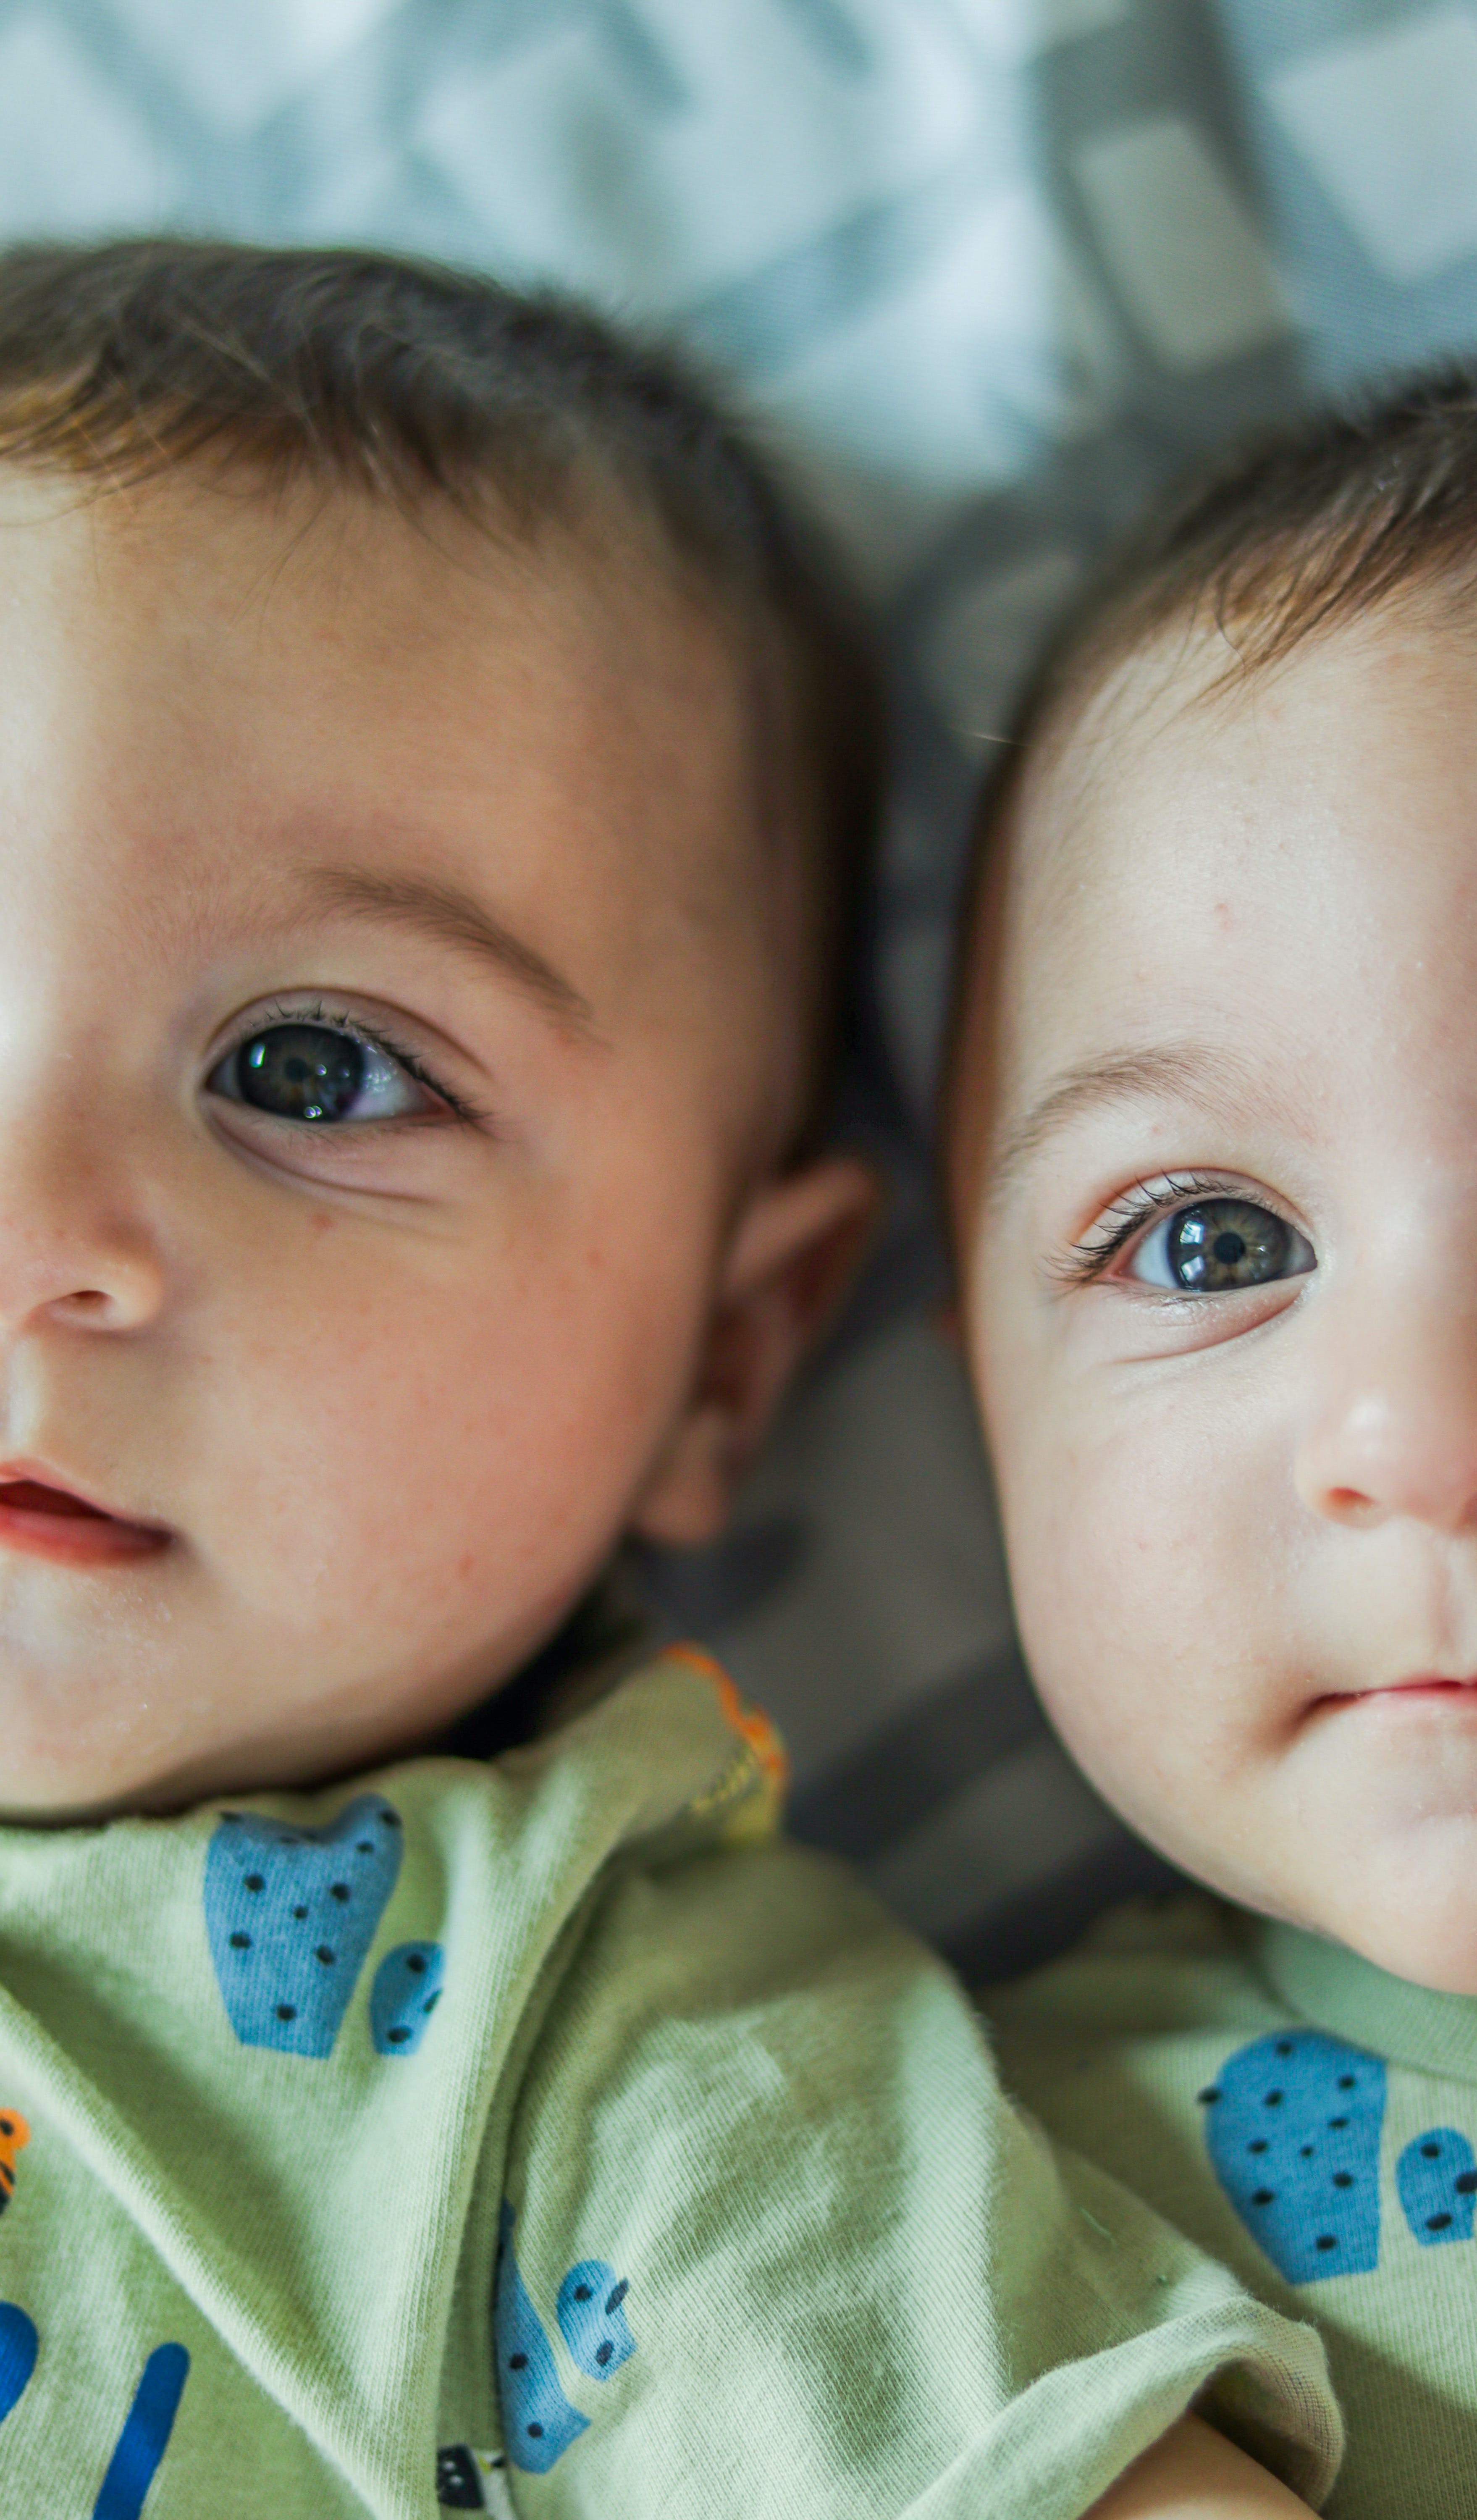 A close up of two babies | Source: Pexels